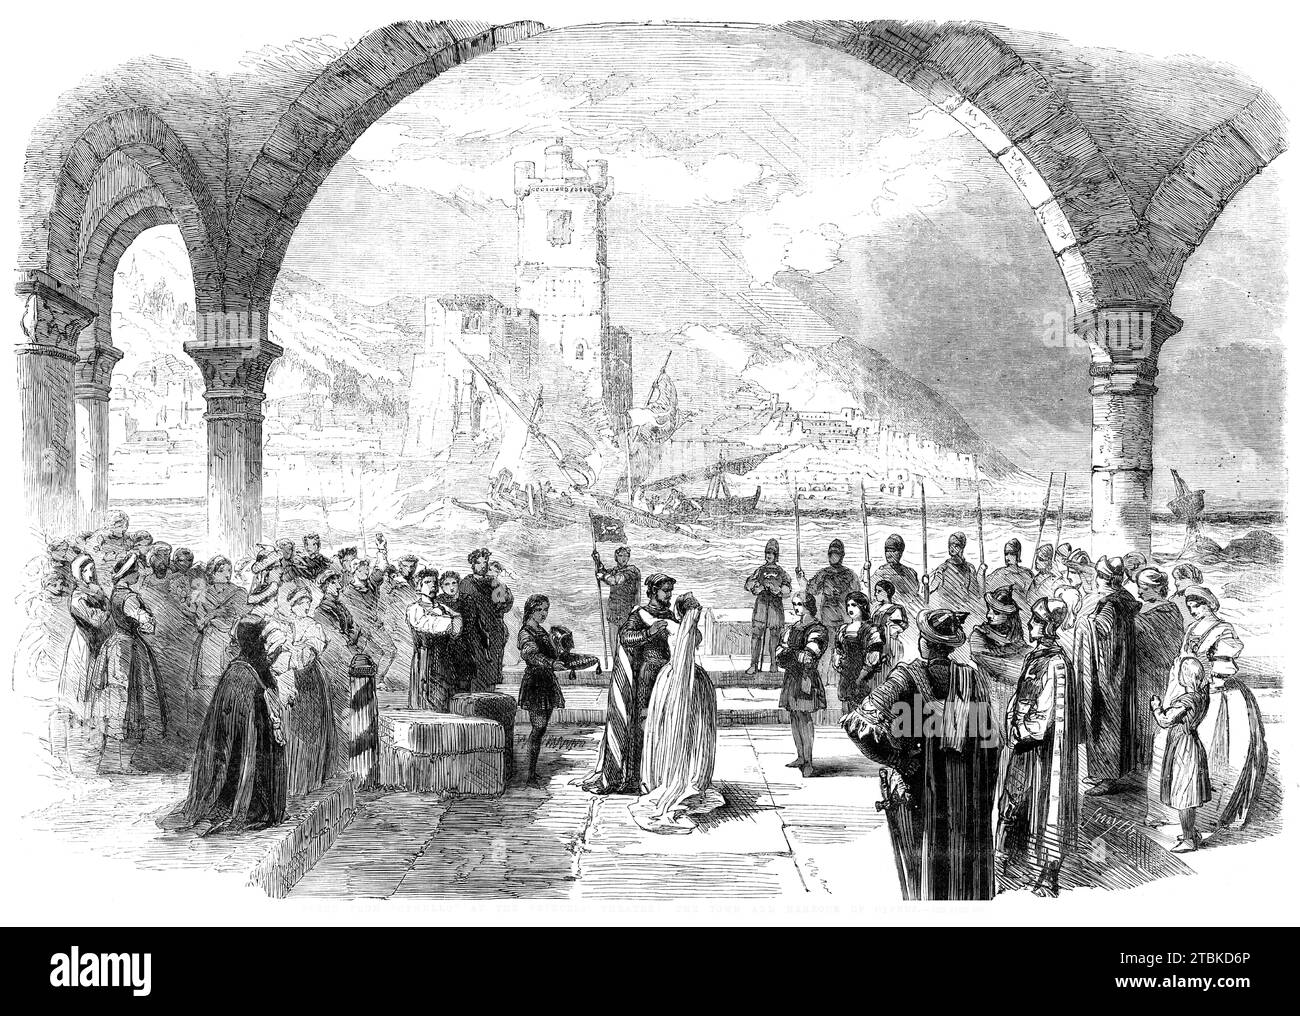 Scene from &quot;Othello&quot; at the Princess' Theatre: the town and harbour of Cyprus, 1861. London stage production: Charles Fechter 'blacked up' as Othello. The scene, '...Cyprus under...a gradually abating storm...places the spectator, as it were, on a platform before the town, looking upon the harbour. Never were Mr. Telbin's skill and taste more beautifully shown than in this well-disposed pictorial set. [The set design includes]...a large arcade at the back of the scene, a gate on the right, and a capstan at the left comer, surrounded with bales of merchandise. These adjuncts enable th Stock Photo